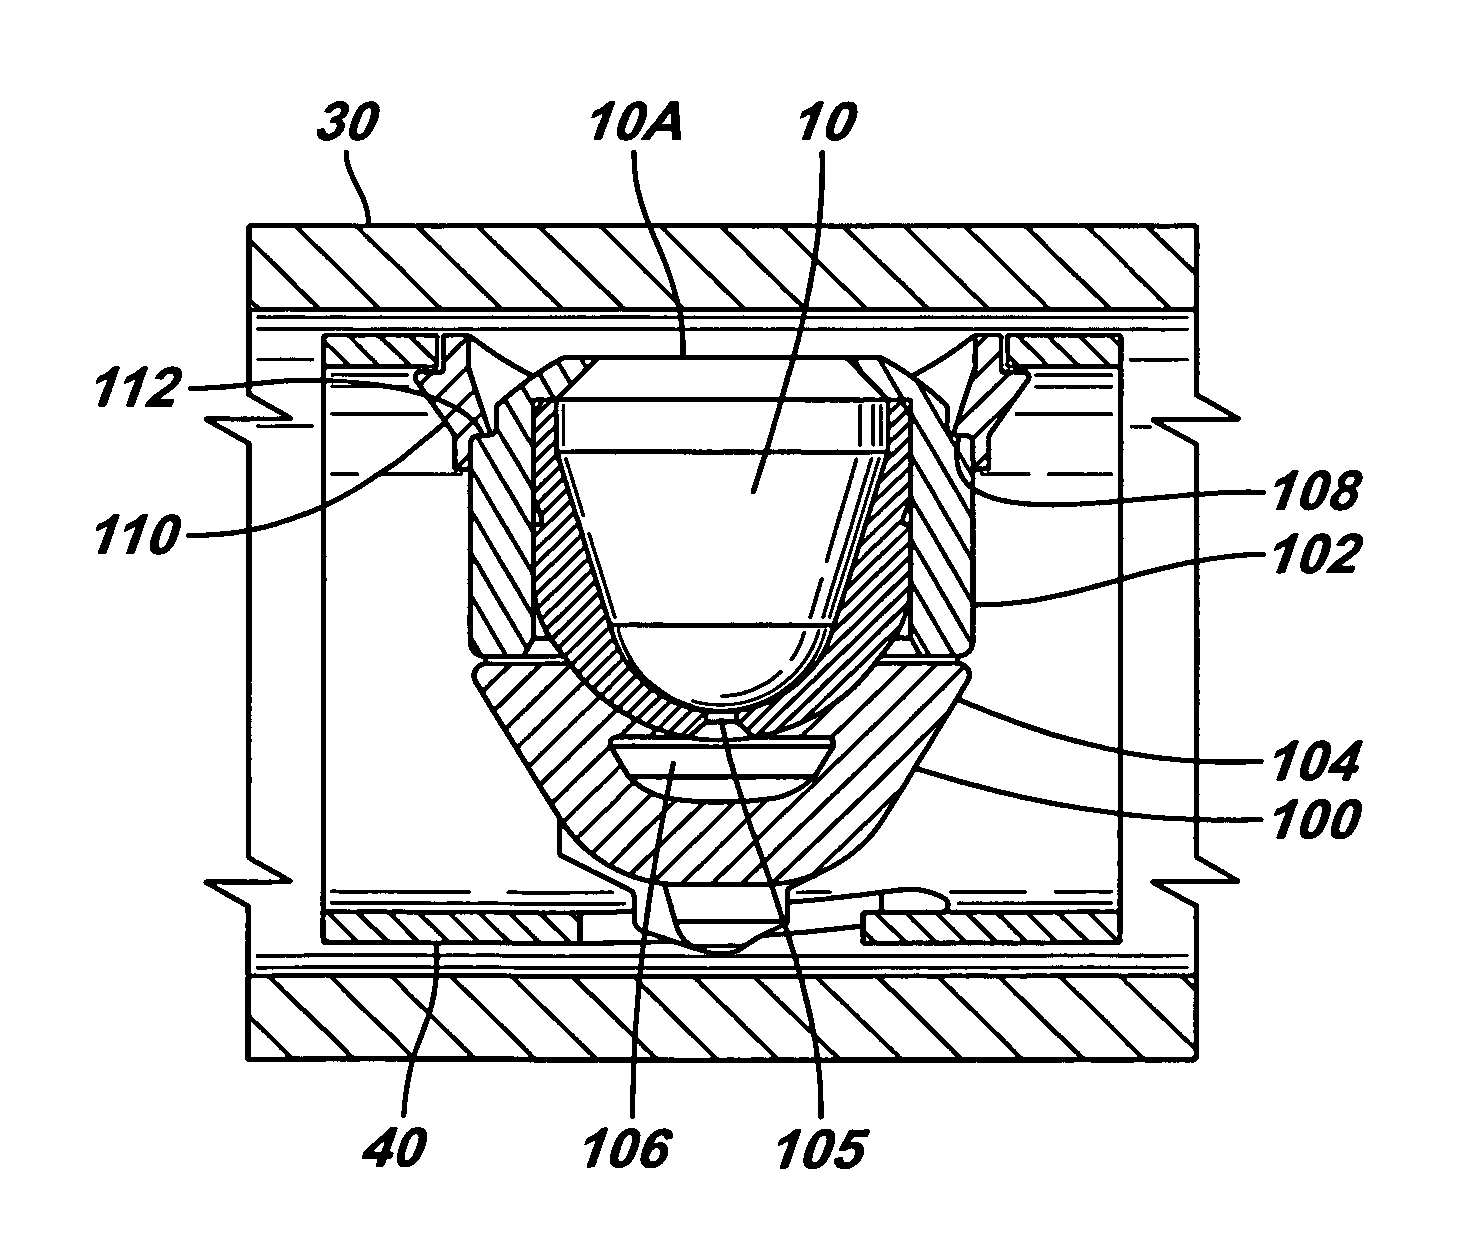 Charge holder apparatus